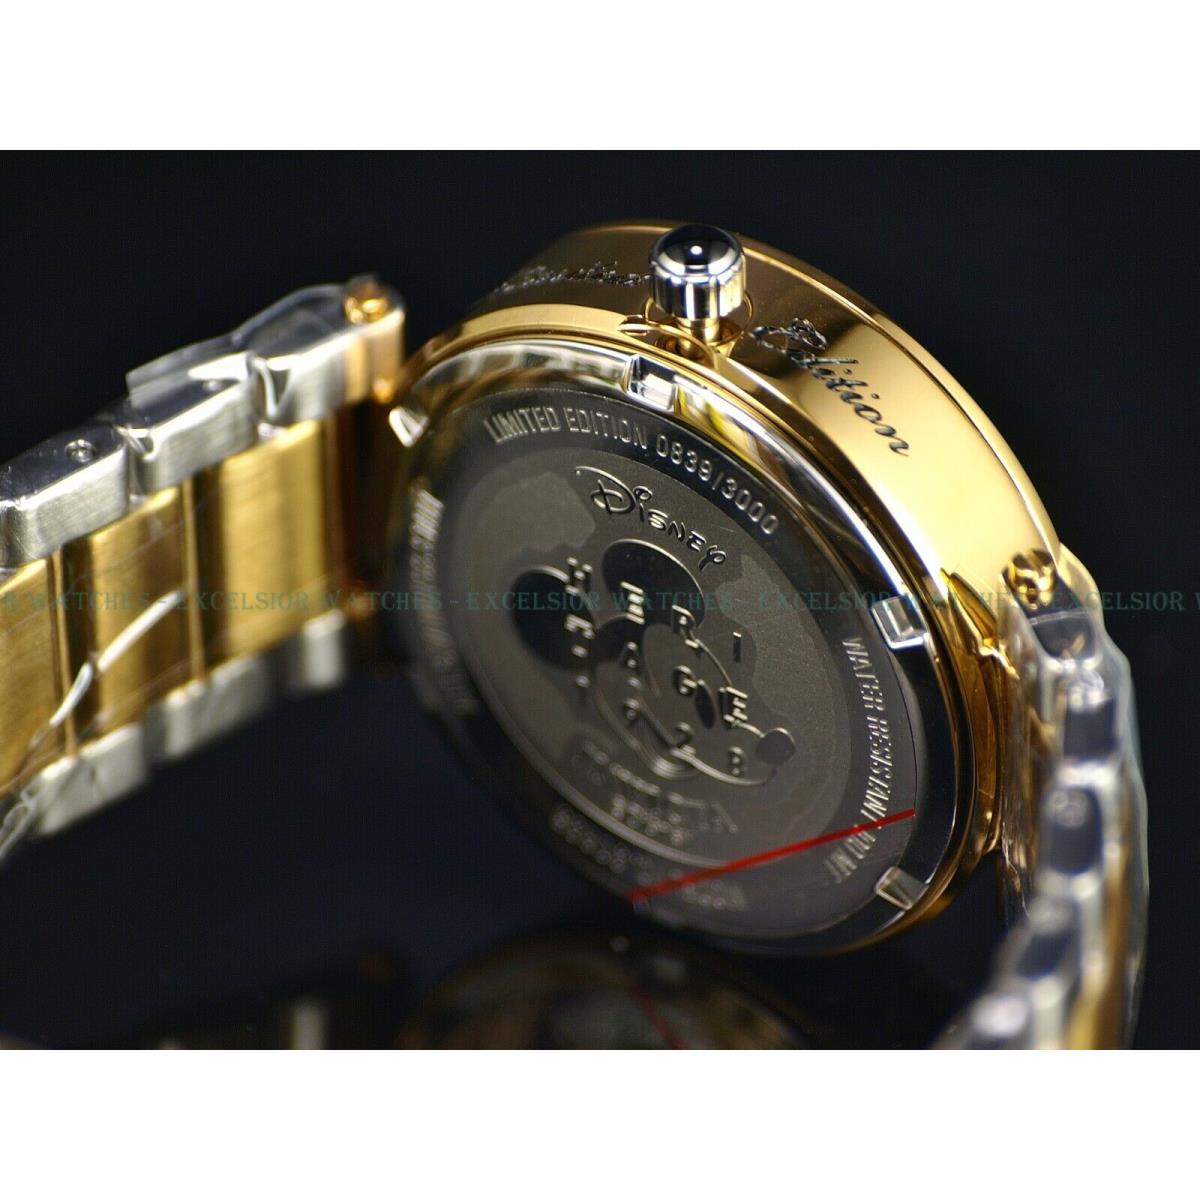 Invicta watch  - White MOP Dial, Gold Band, Gold Bezel